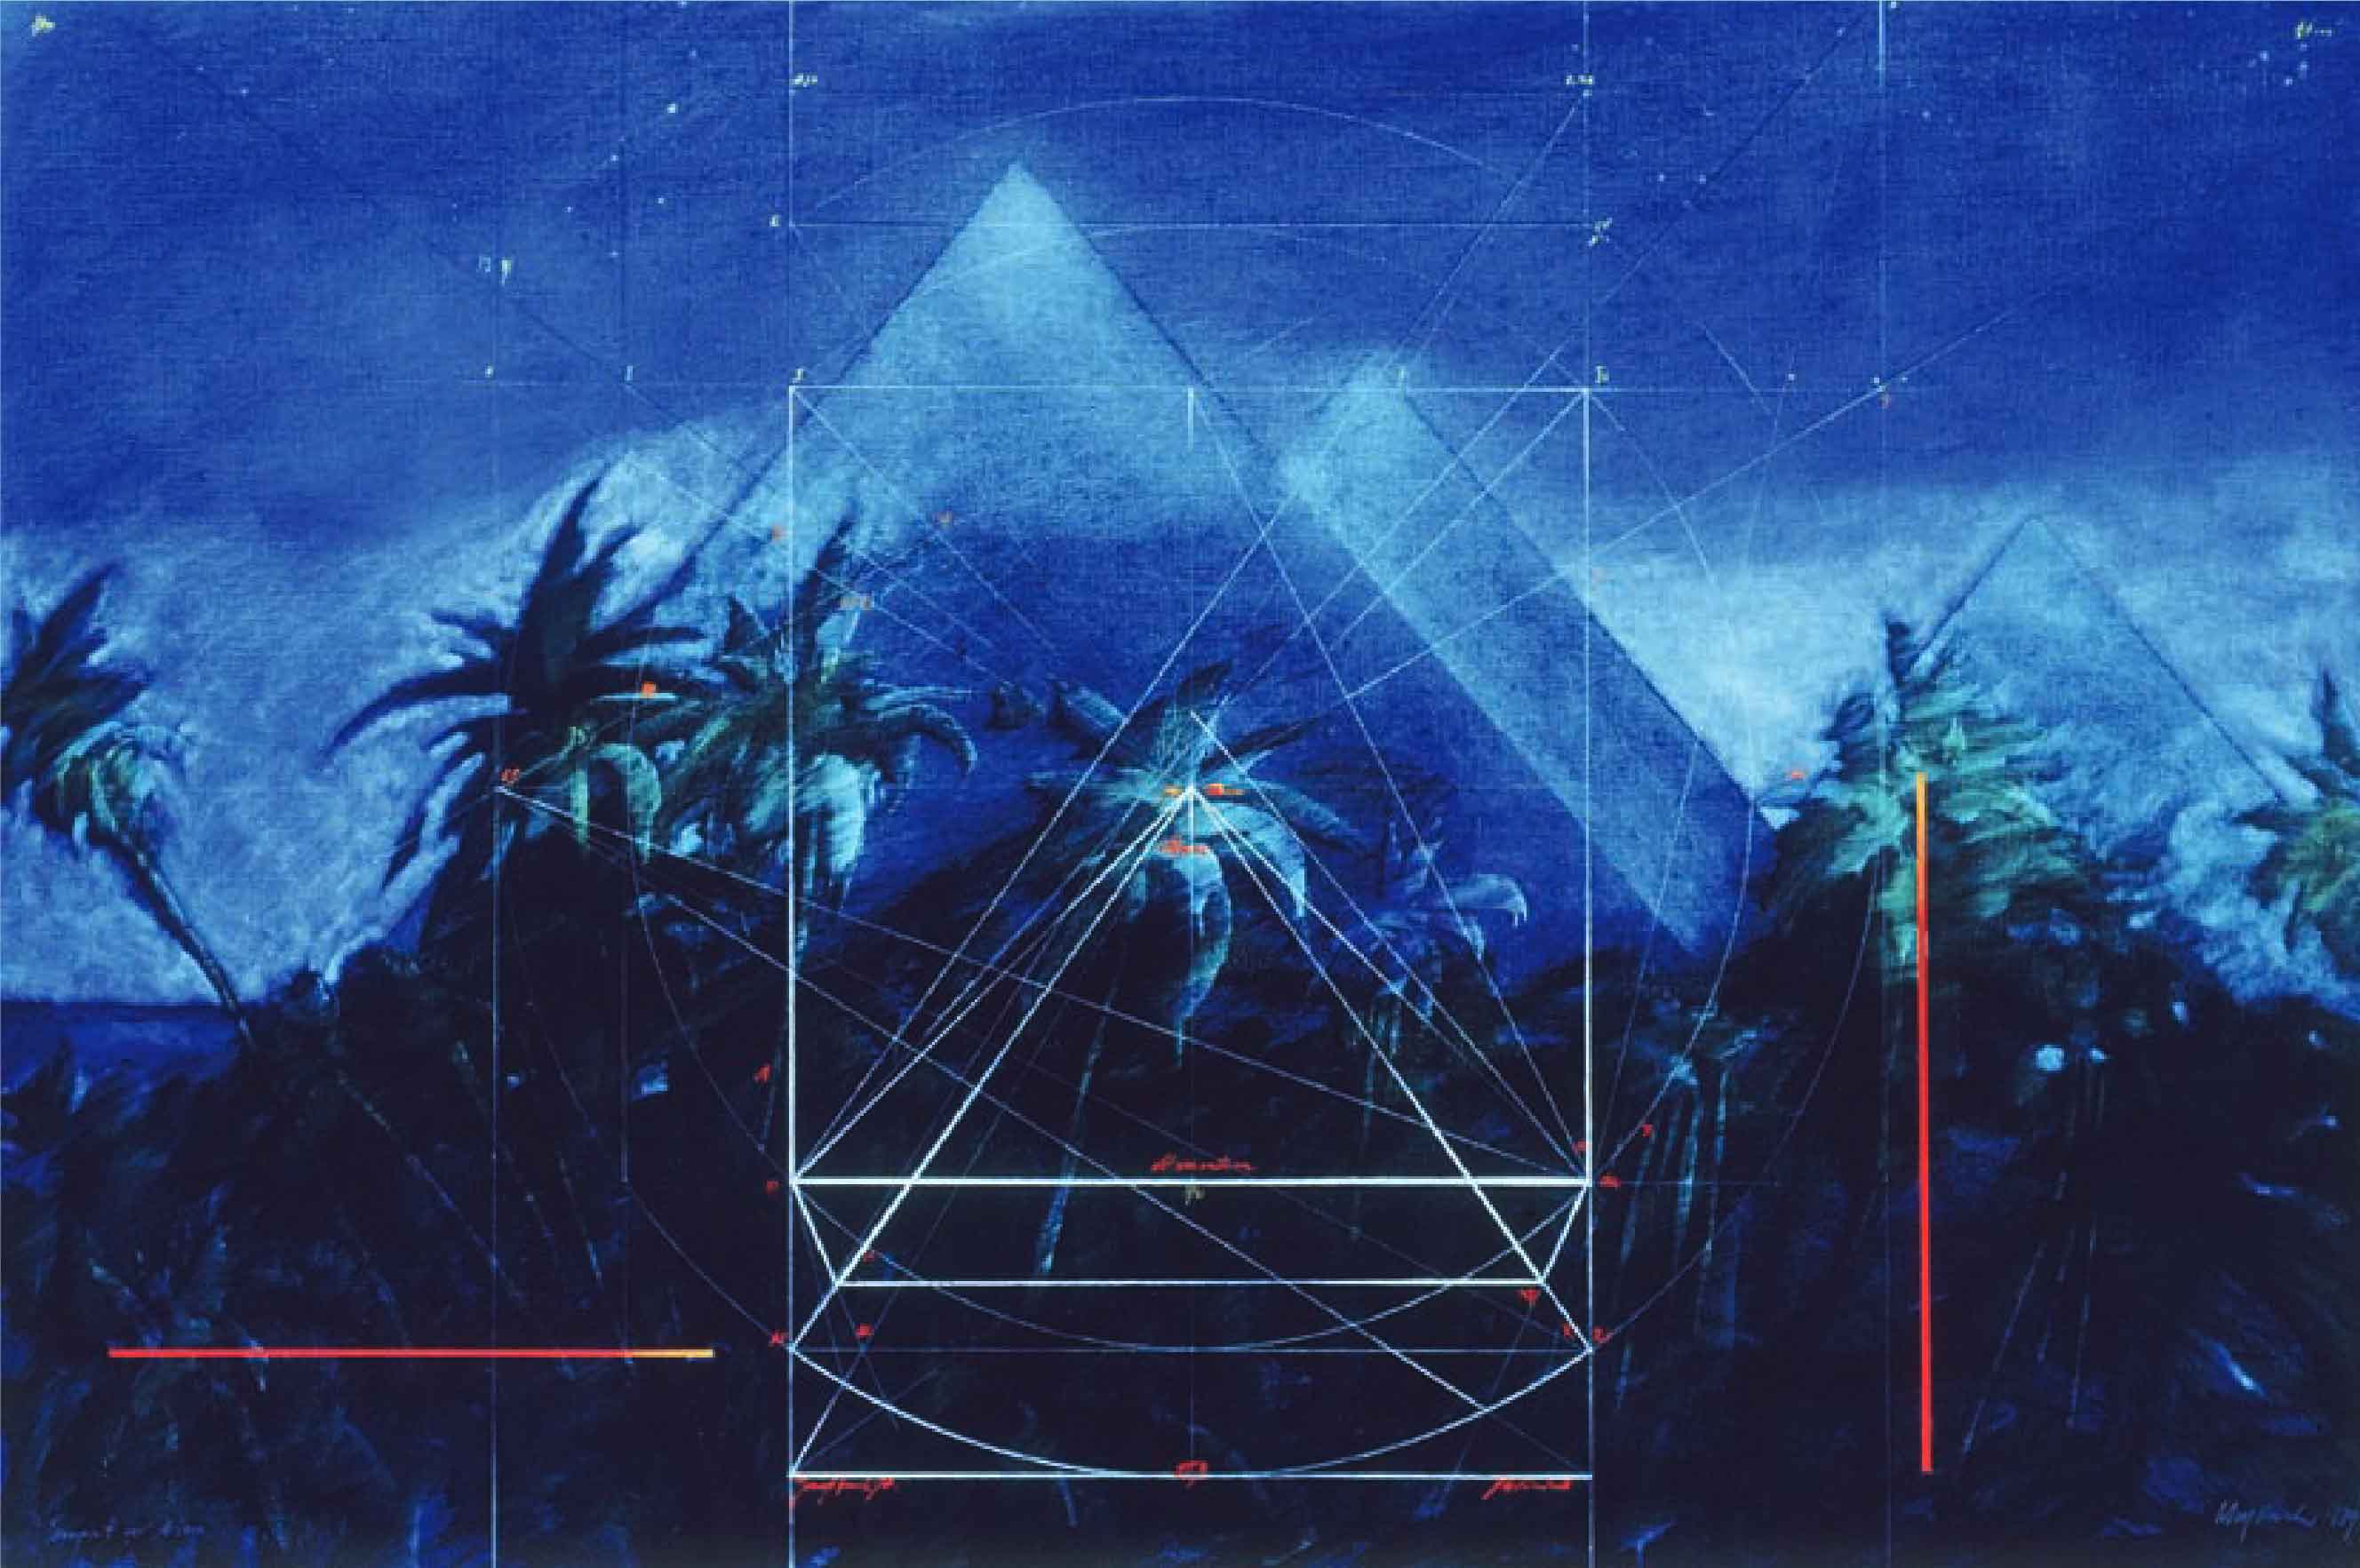 Wulf Barsch, The Template, a painting of the pyramids at Giza at night, overlaid with diagrams suggesting an idealized mathematical pyramid from which they were constructed